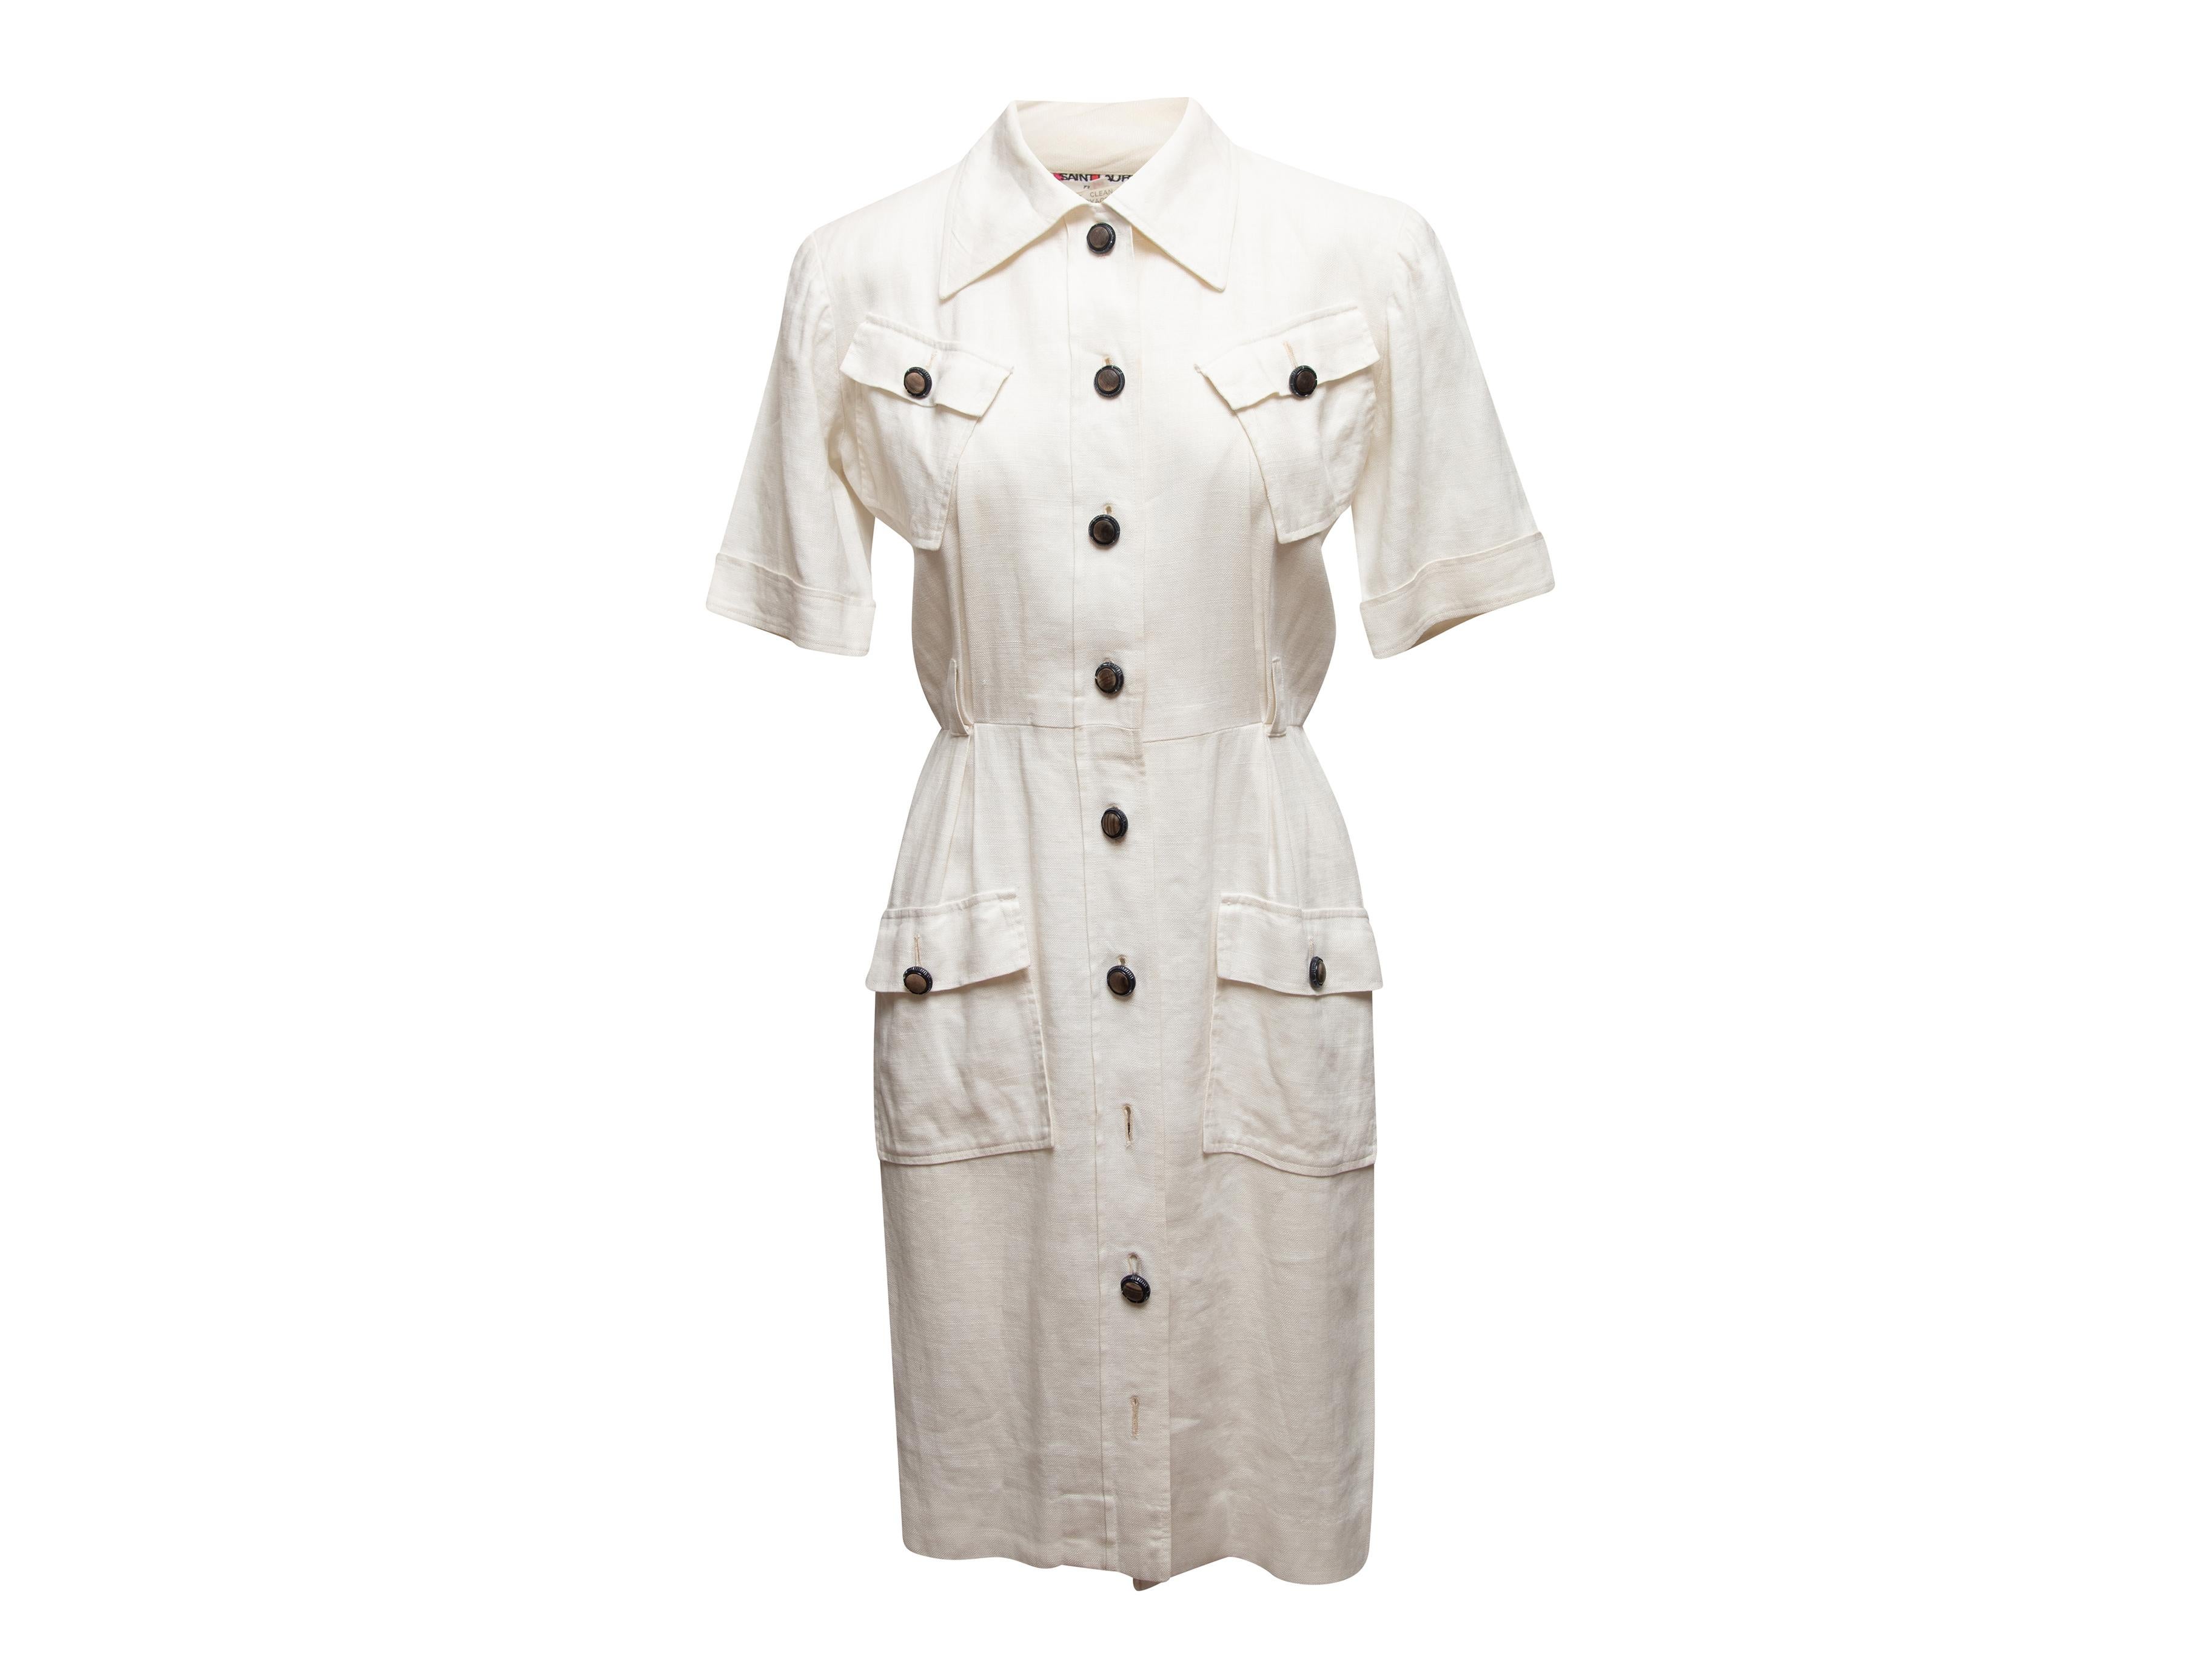 Vintage white linen dress by Saint Laurent. Circa 1970s. Pointed collar. Four flap pockets at front. Button closures at front. Designer size 38. 38